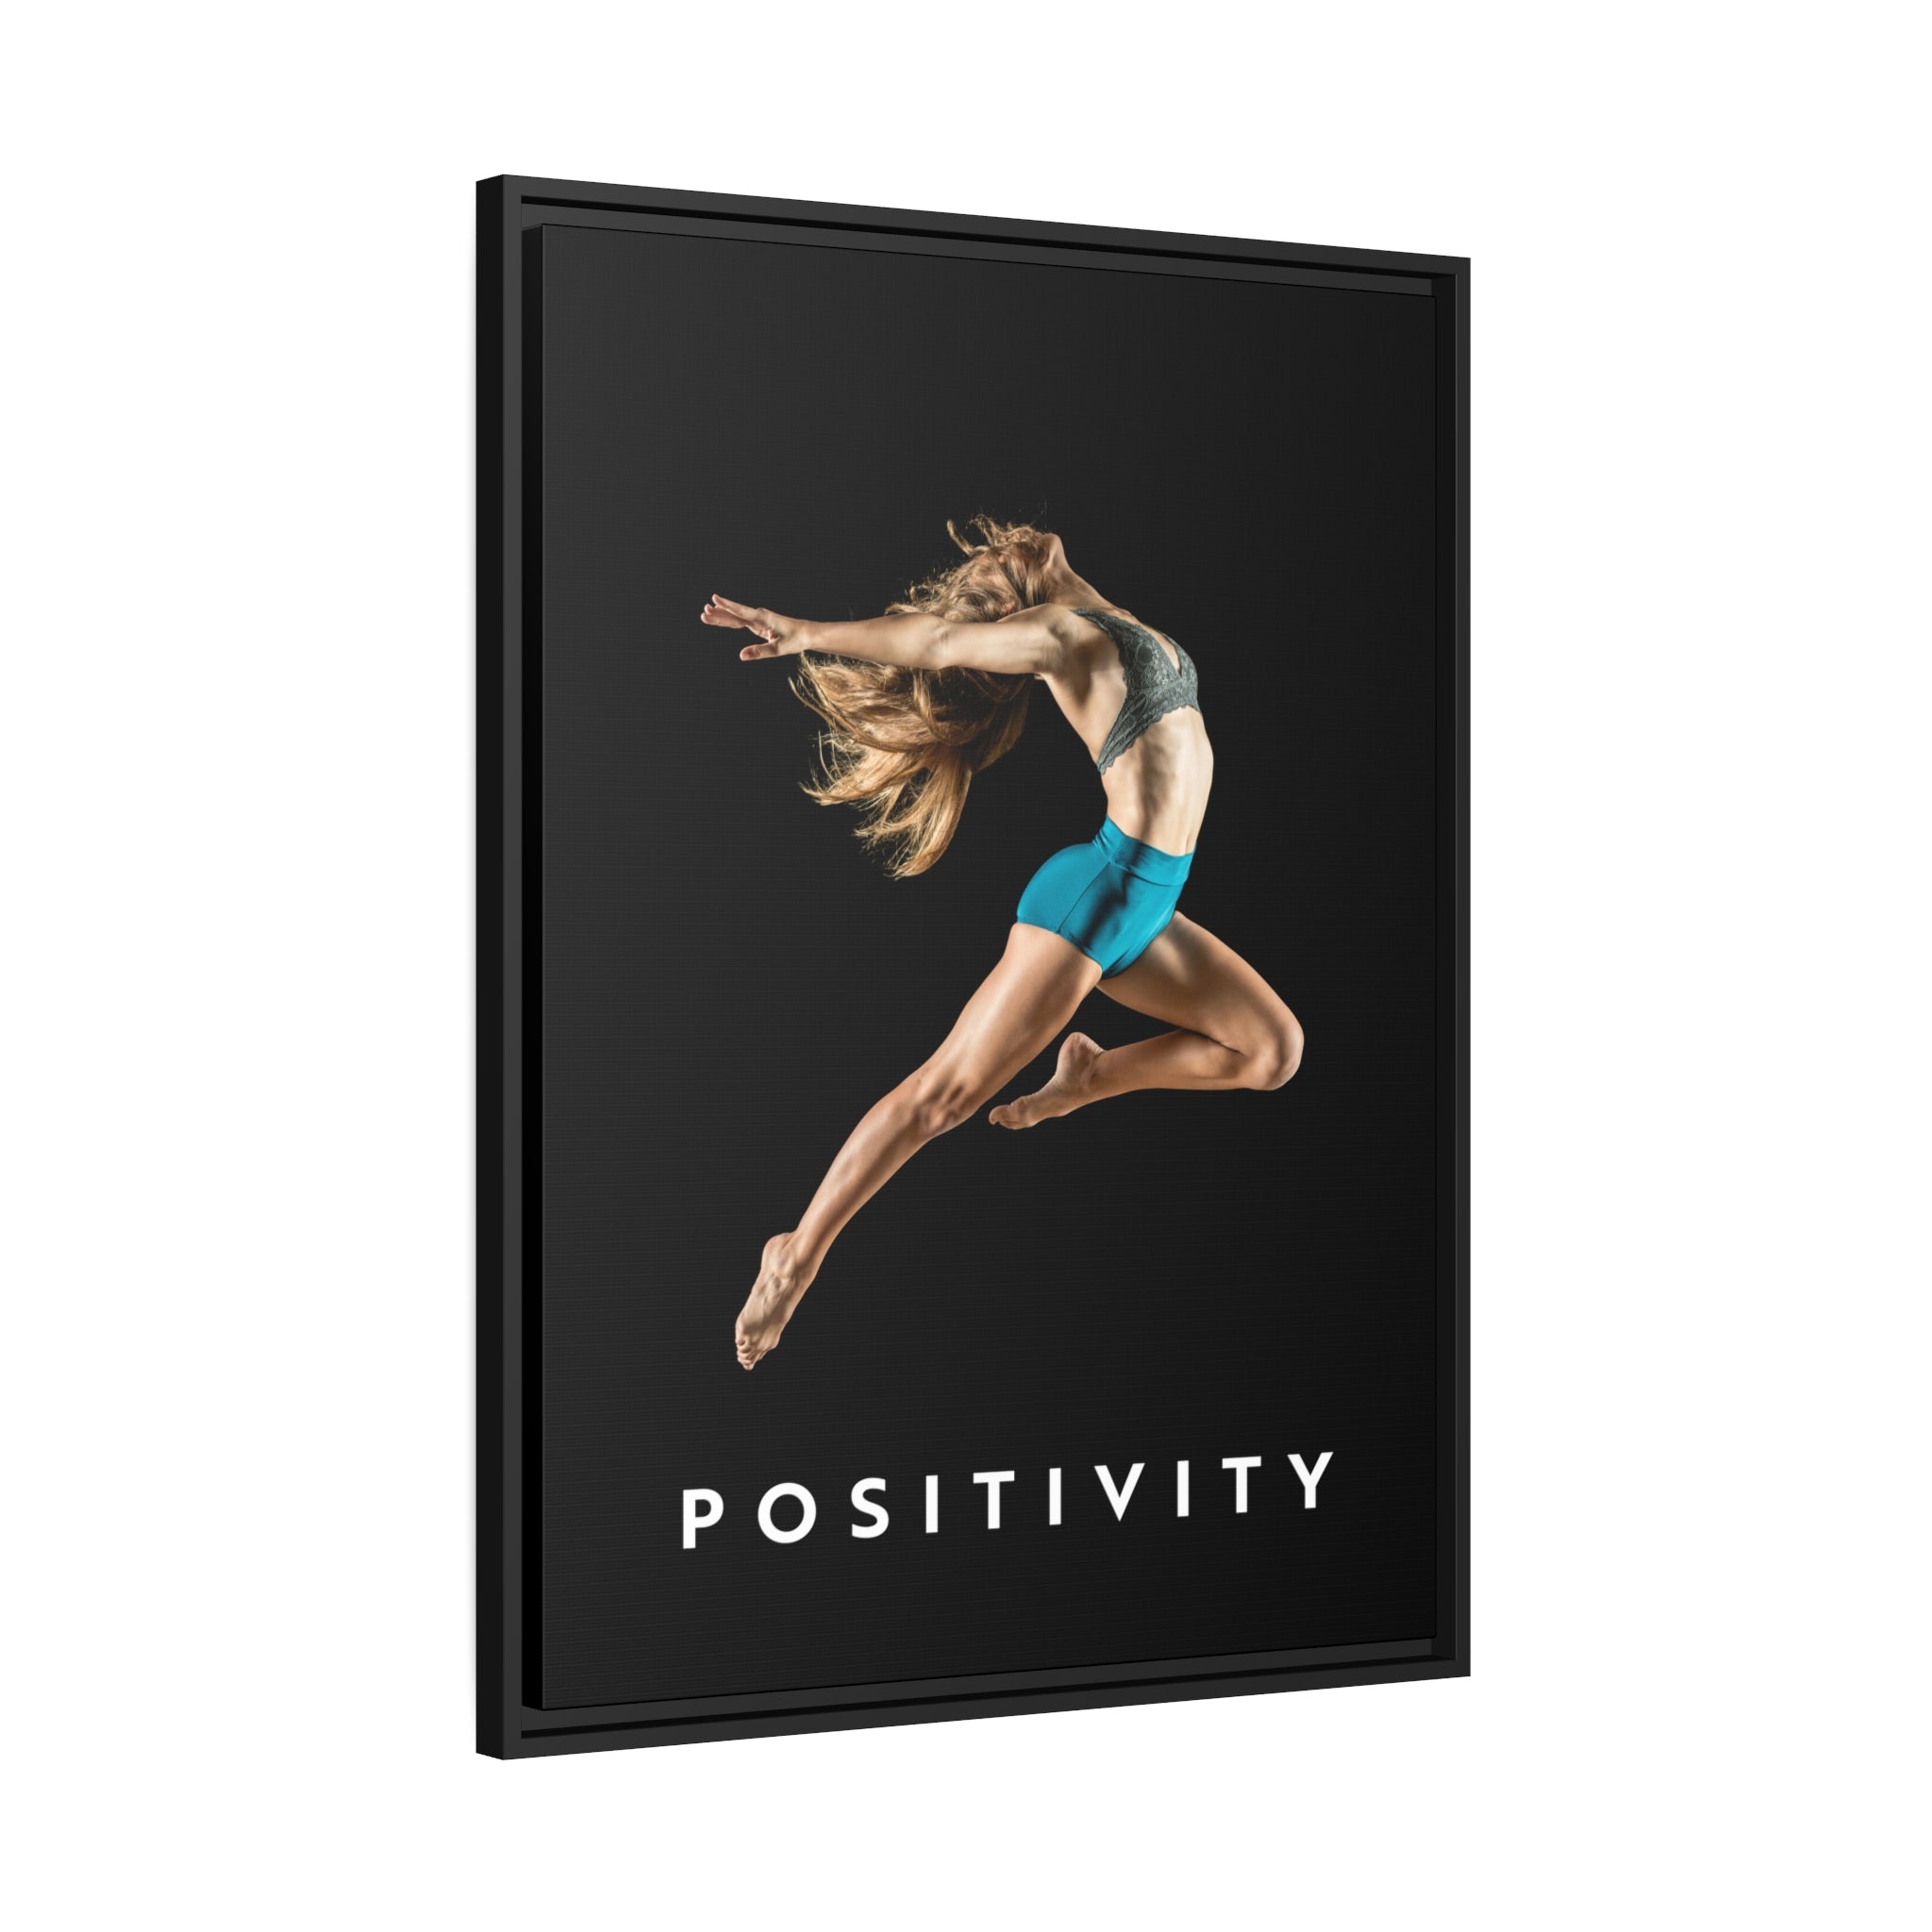 Positivity - Airborne - Wall Art additional image 5